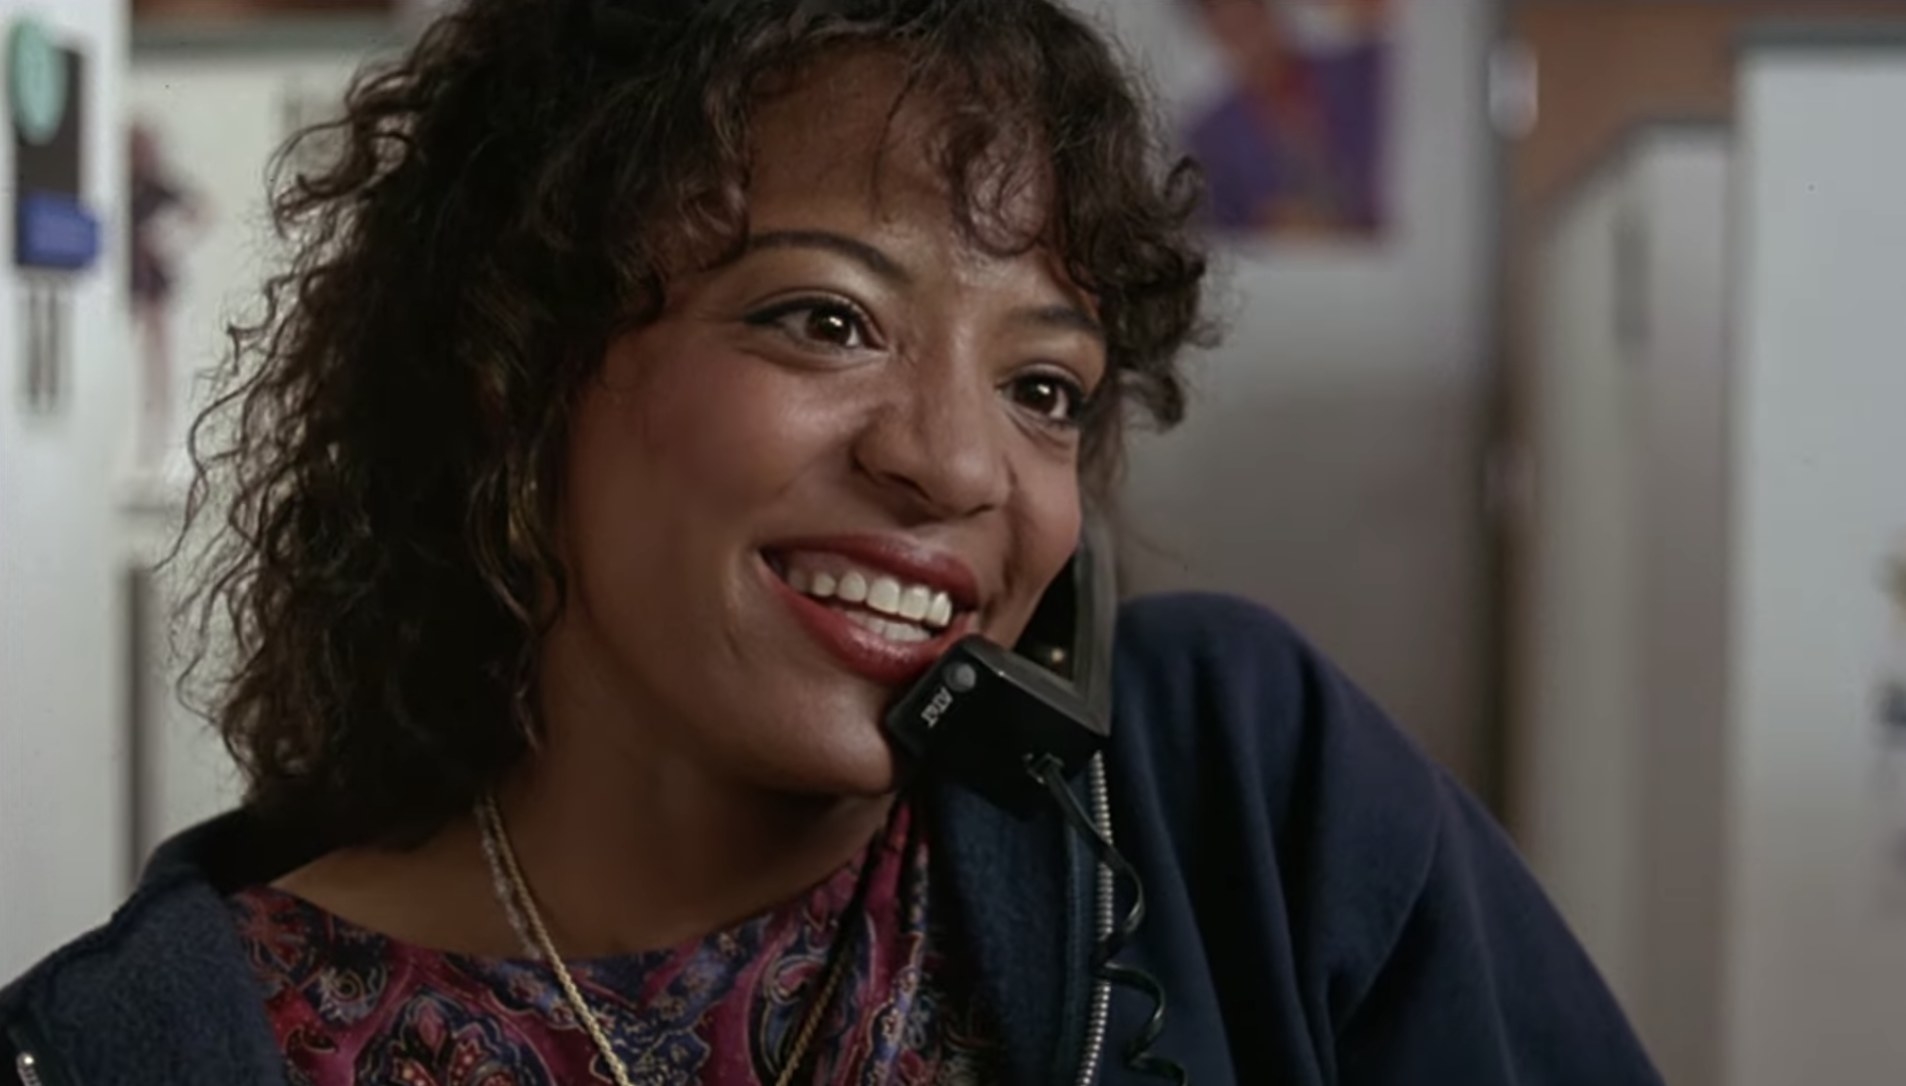 Lauren Vélez smiles while holding a telephone to her ear in the movie.